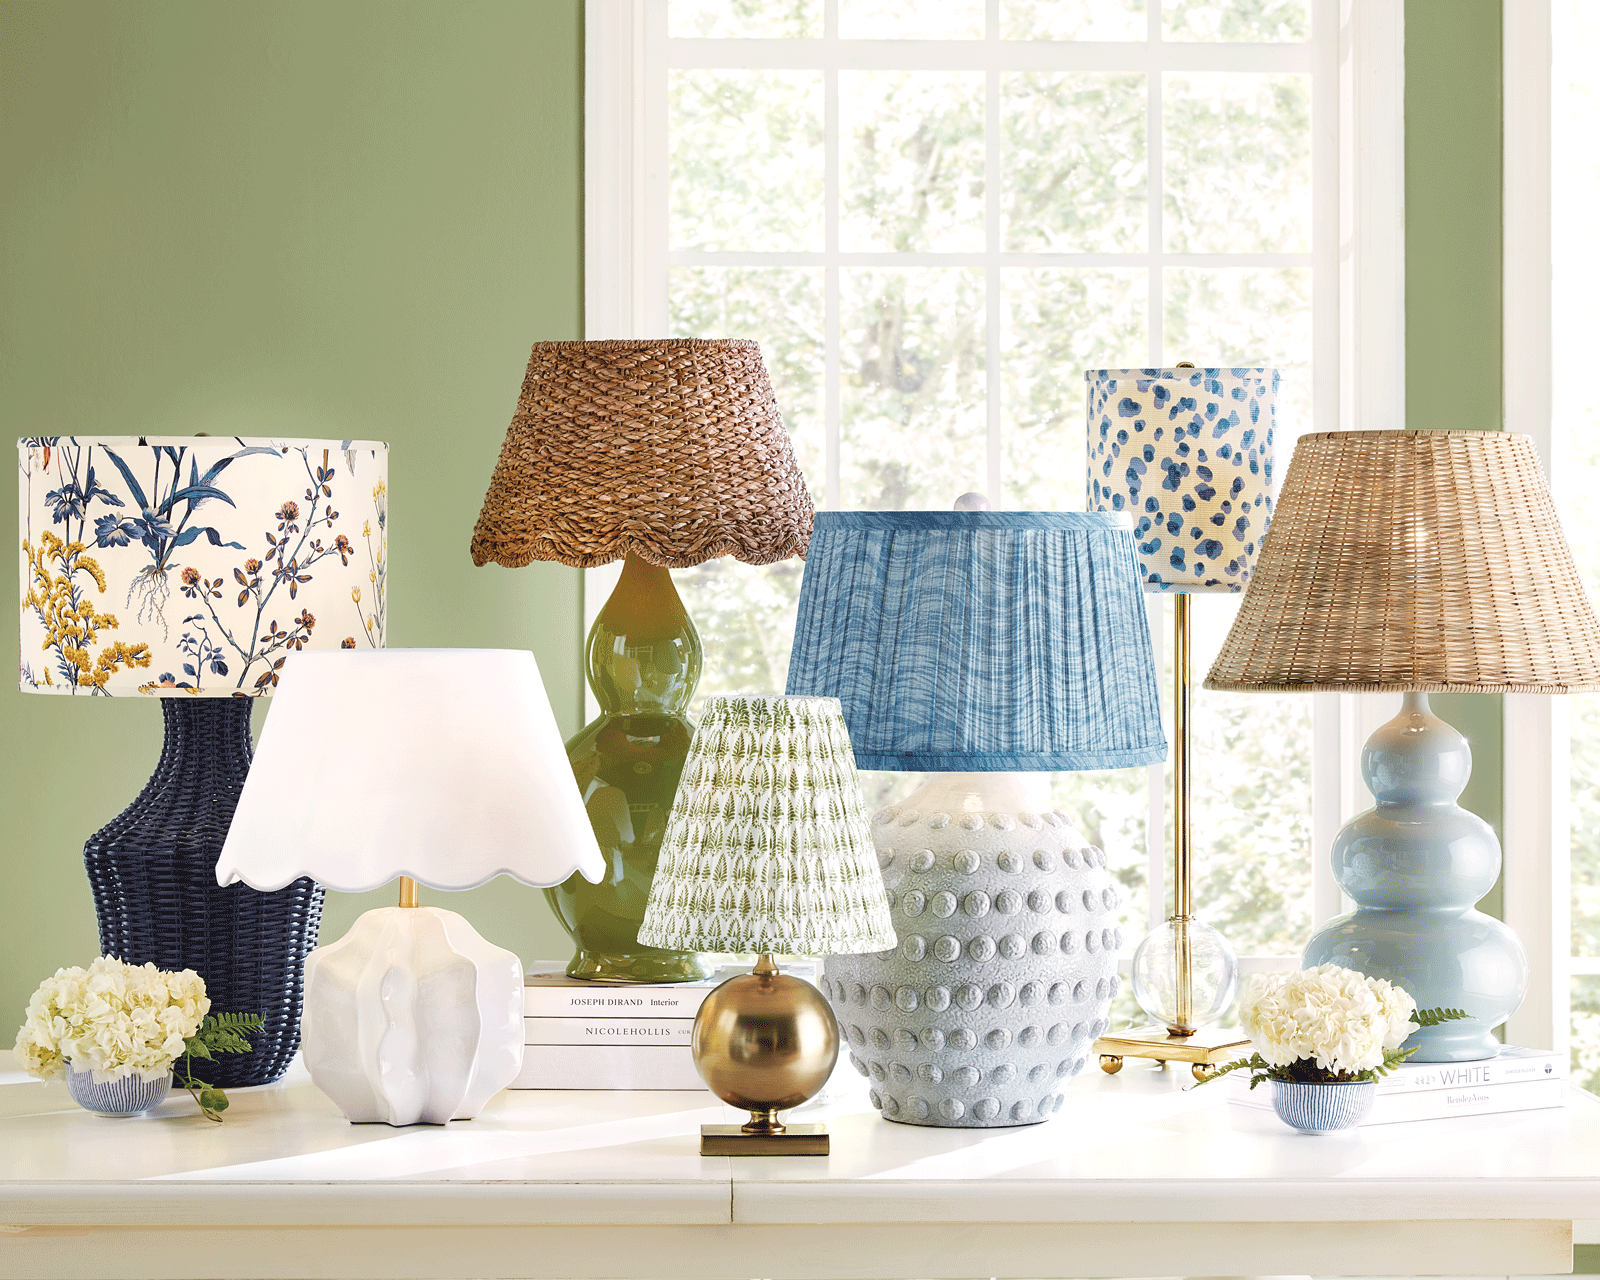 Different types of lampshades